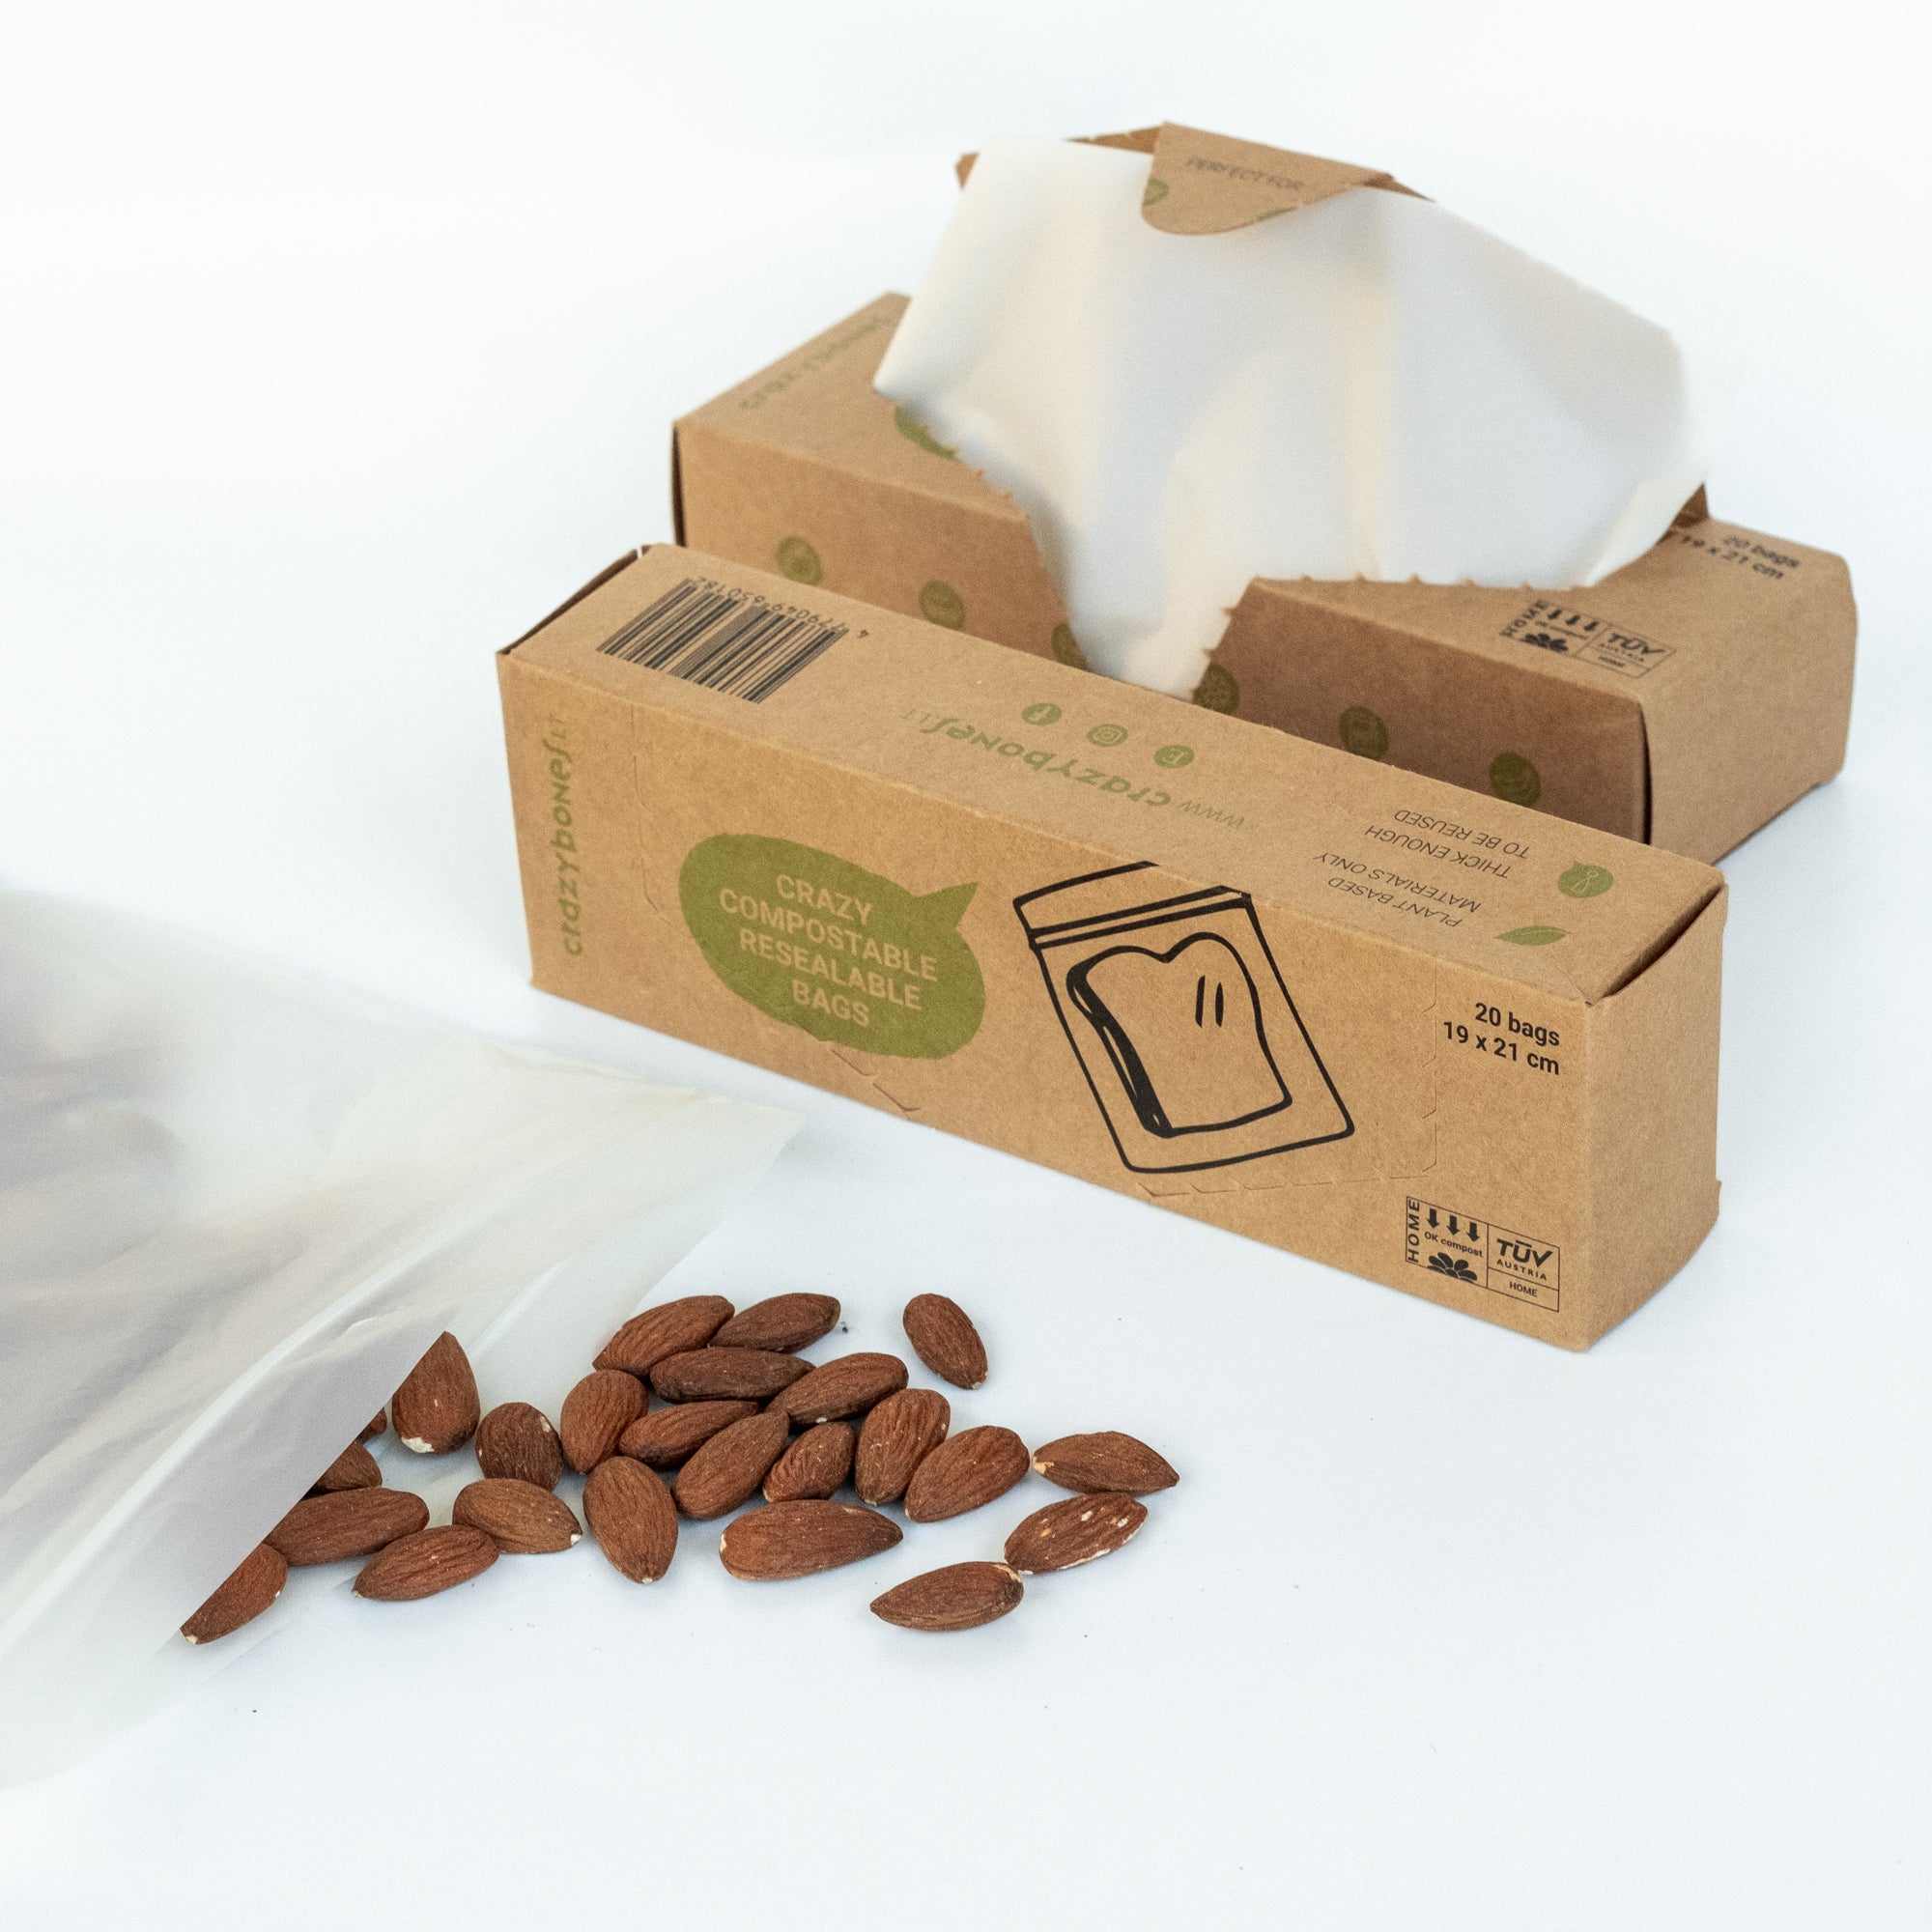 Compostable resealable bags